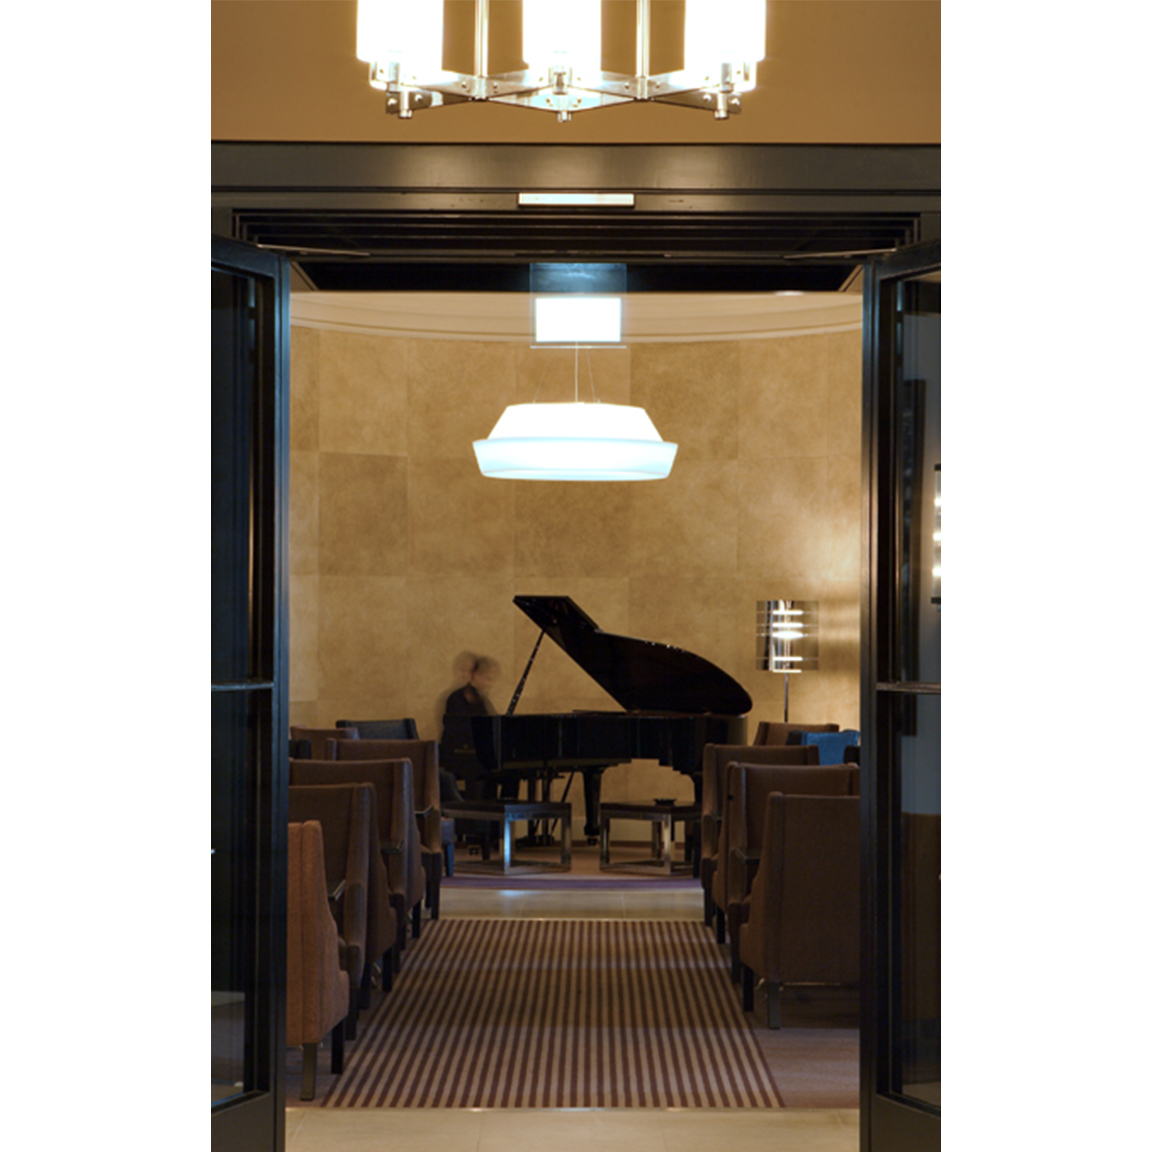 pianist playing in the hall